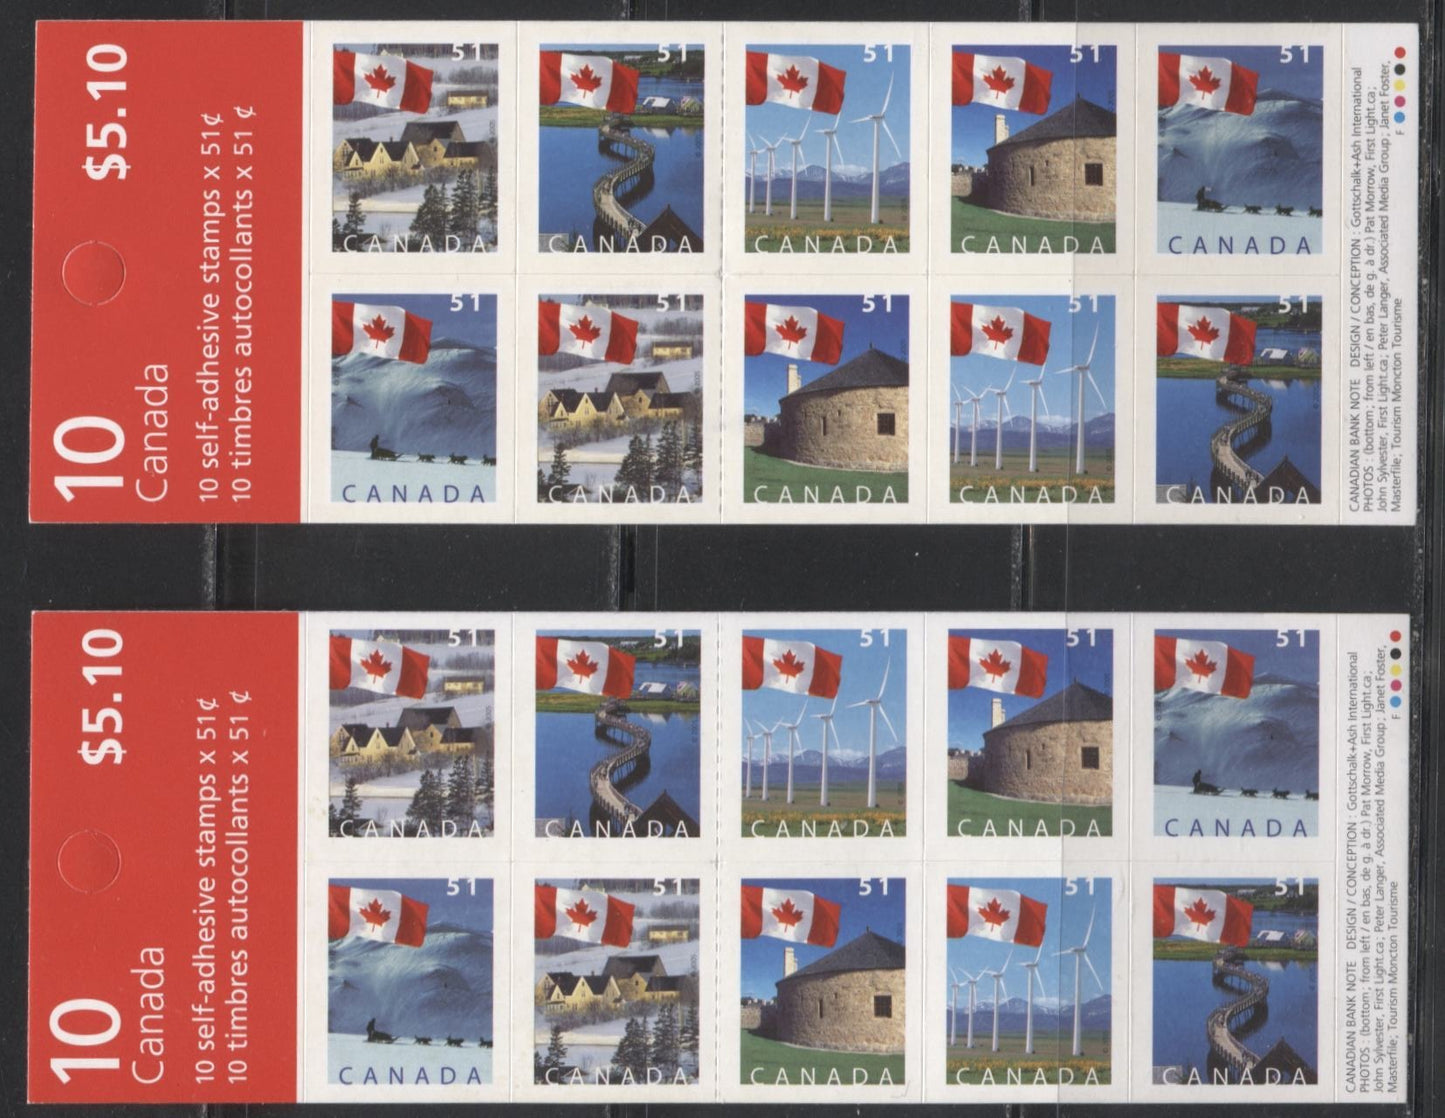 Canada #BK317a 2004-2010 Floral & Canadian Pride Definitives, 2 Complete $5.10 Booklets, Dead Fasson Paper, CBN Printing, Strong and Weak 4 mm GT-4 Tagging, Narrow 29 Slit Roulette